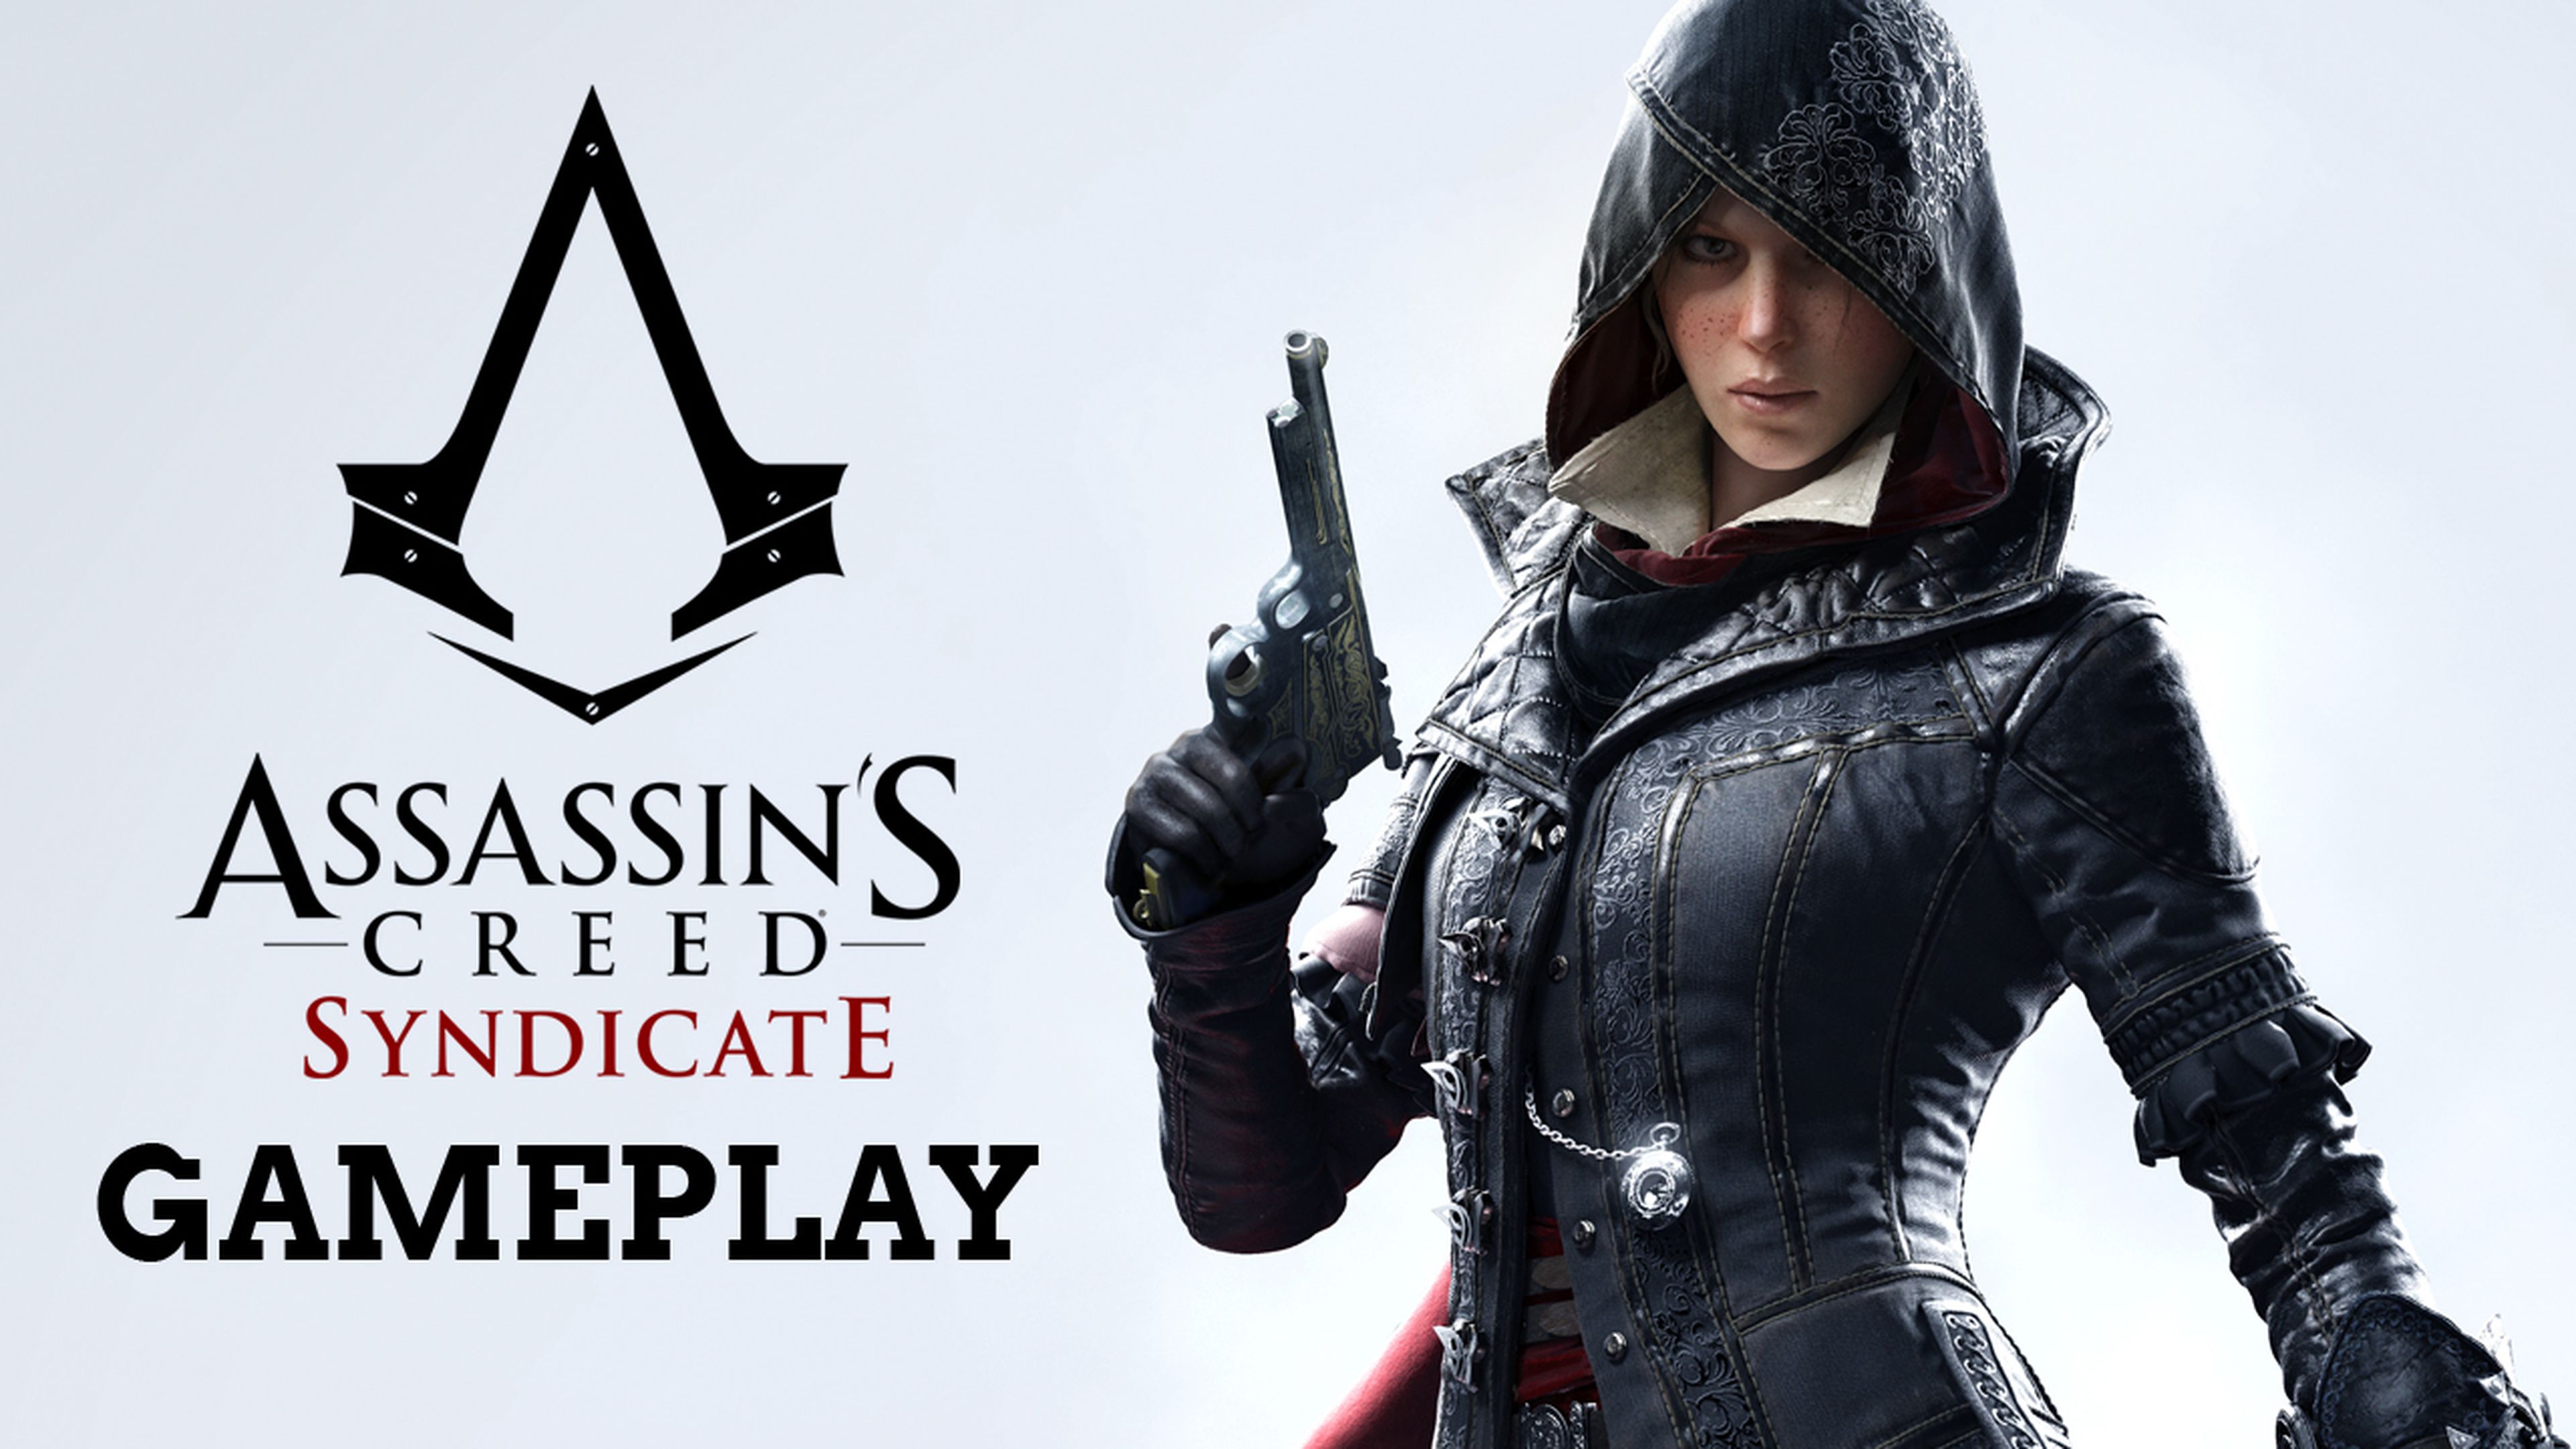 Gameplay Assassin's Creed Syndicate